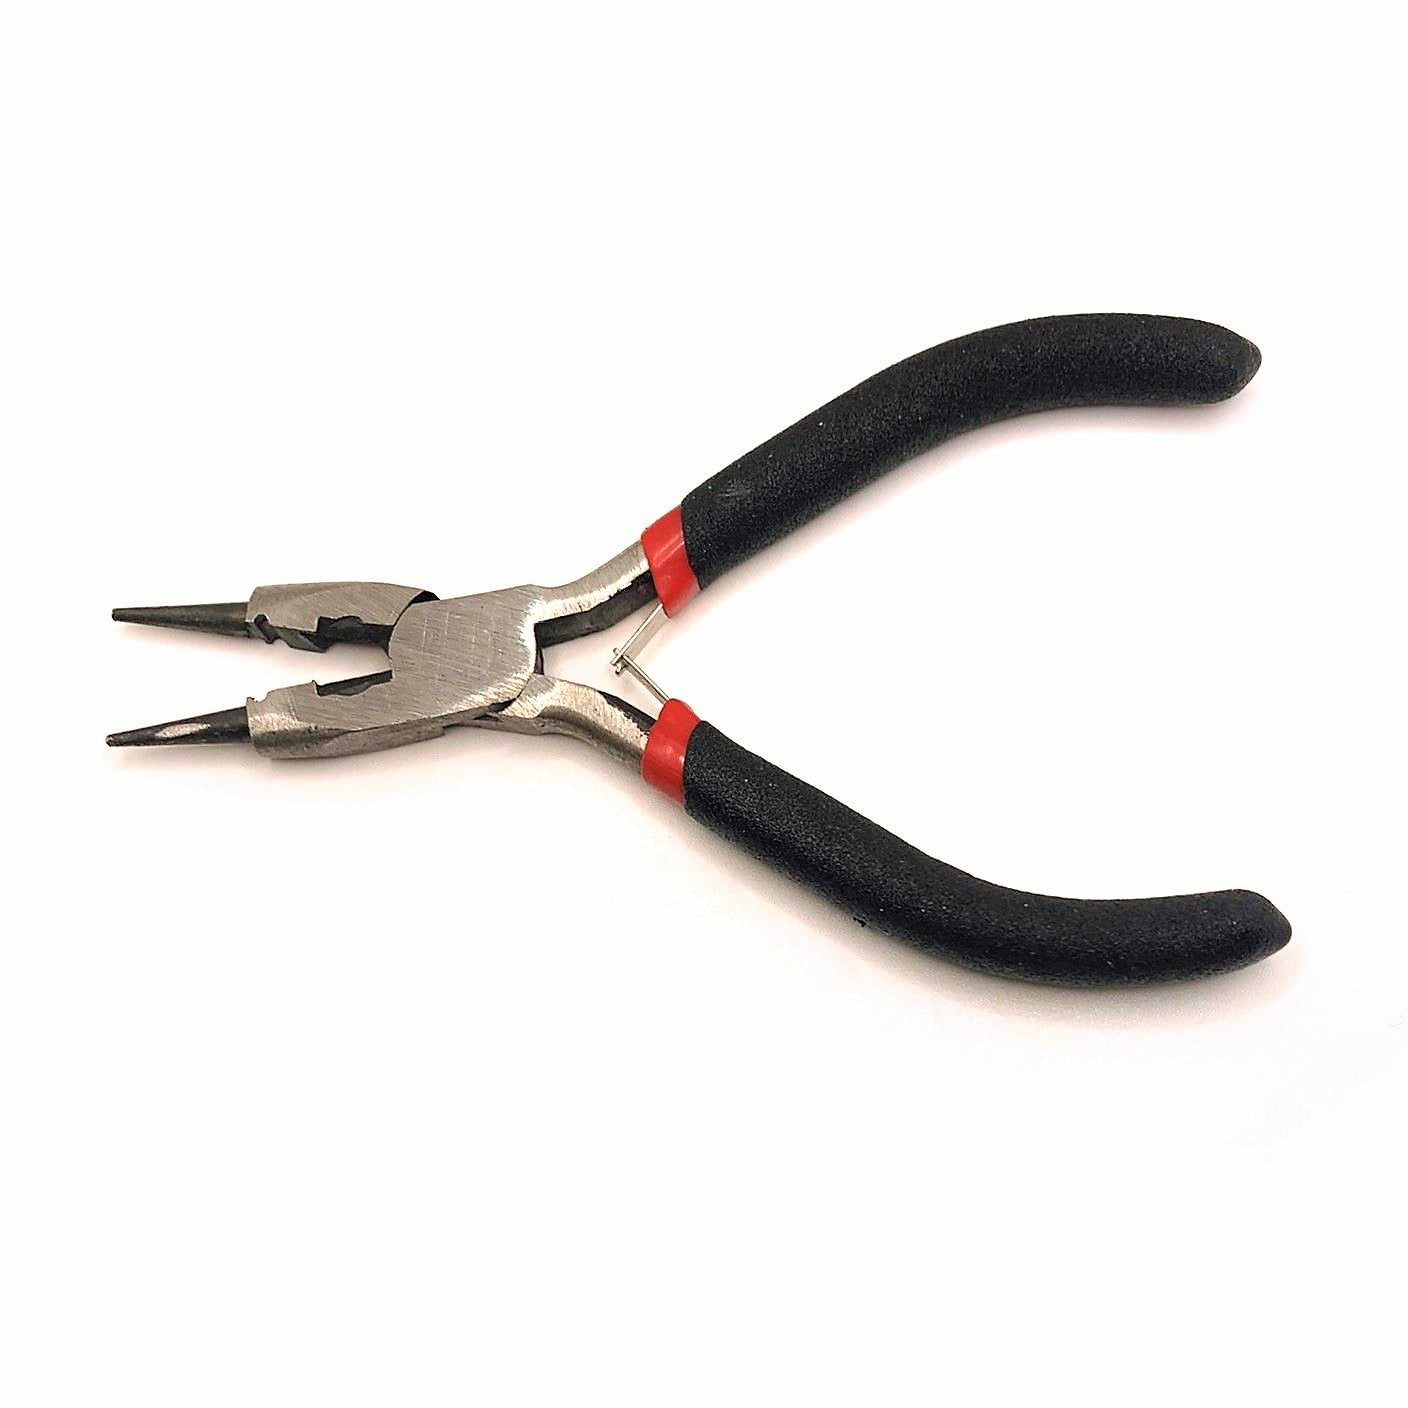 7 Piece Jewelry Making Pliers Set with Lineman, End Cutting, Diagonal  Cutter, Needle, Long, Bent and Round Nose Wire Cutters for Wire Wrapping Kit  (5 In)